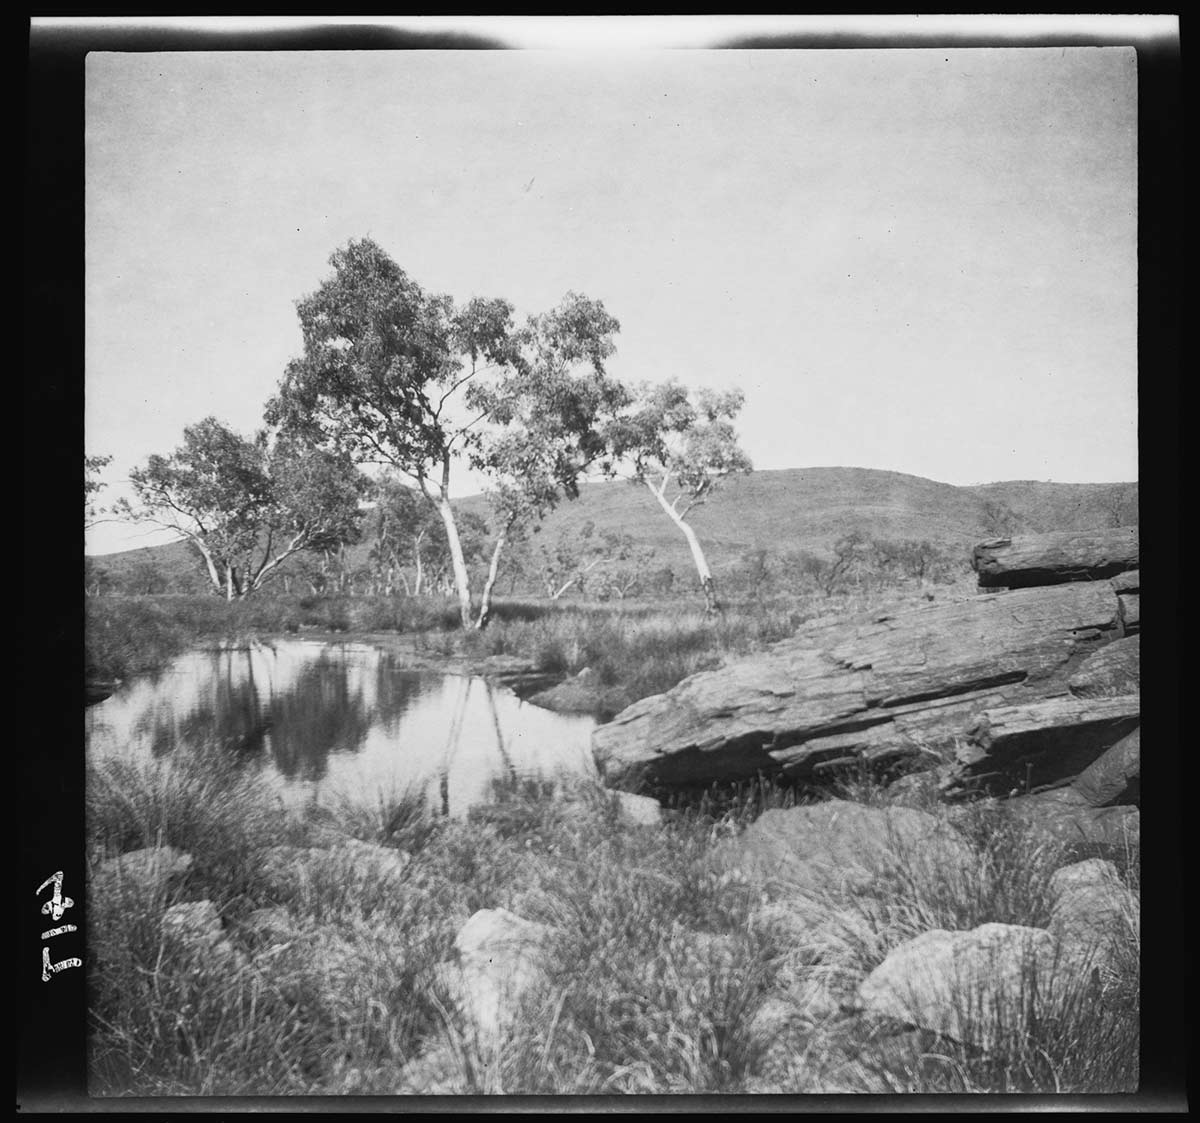 Strawbridge Springs, Tomkinson Ranges, South Australia 1903. The spring pool is in the left middle ground; a single eucalypt tree is at the pool's far edge. Beyond it are scattered eucalypt trees leading to a low mountain range. A rock outcrop with horizontal layers is in the right foreground. Smaller rocks a scattered amongst the long grass at the front of the image. - click to view larger image